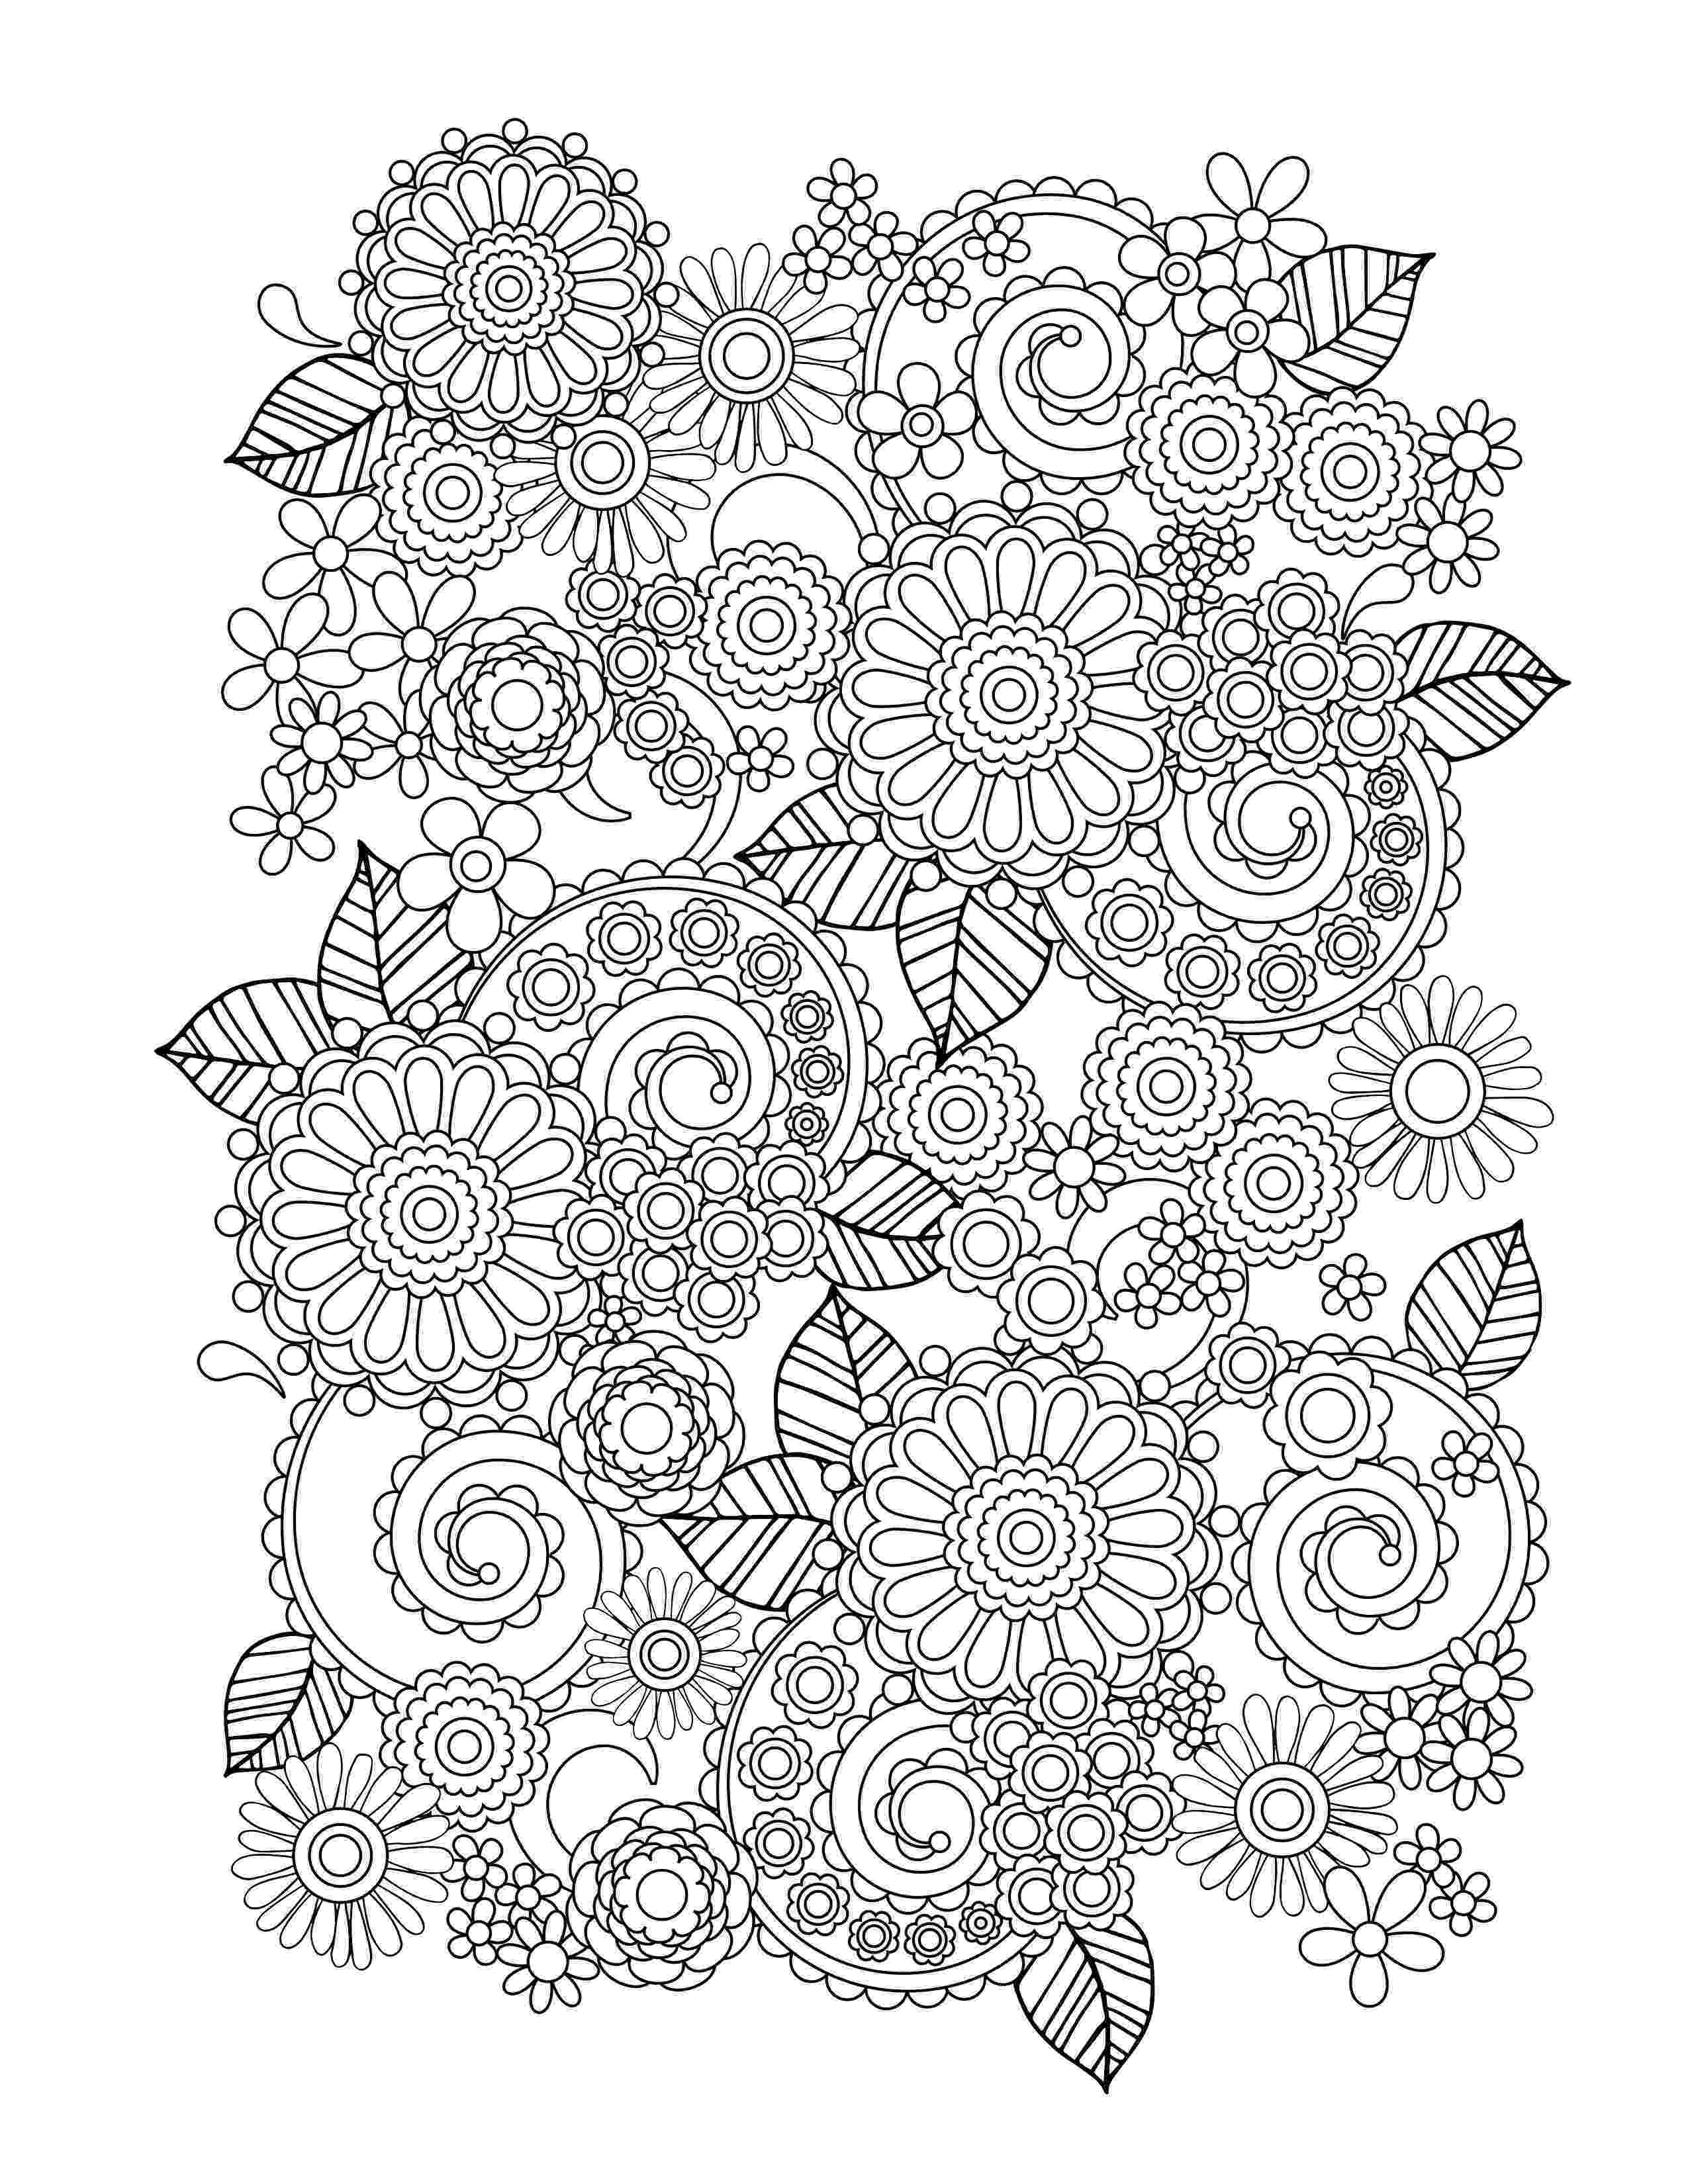 art therapy coloring book hinkler anti coloring for adults art therapy vk adult coloring hinkler art therapy book 